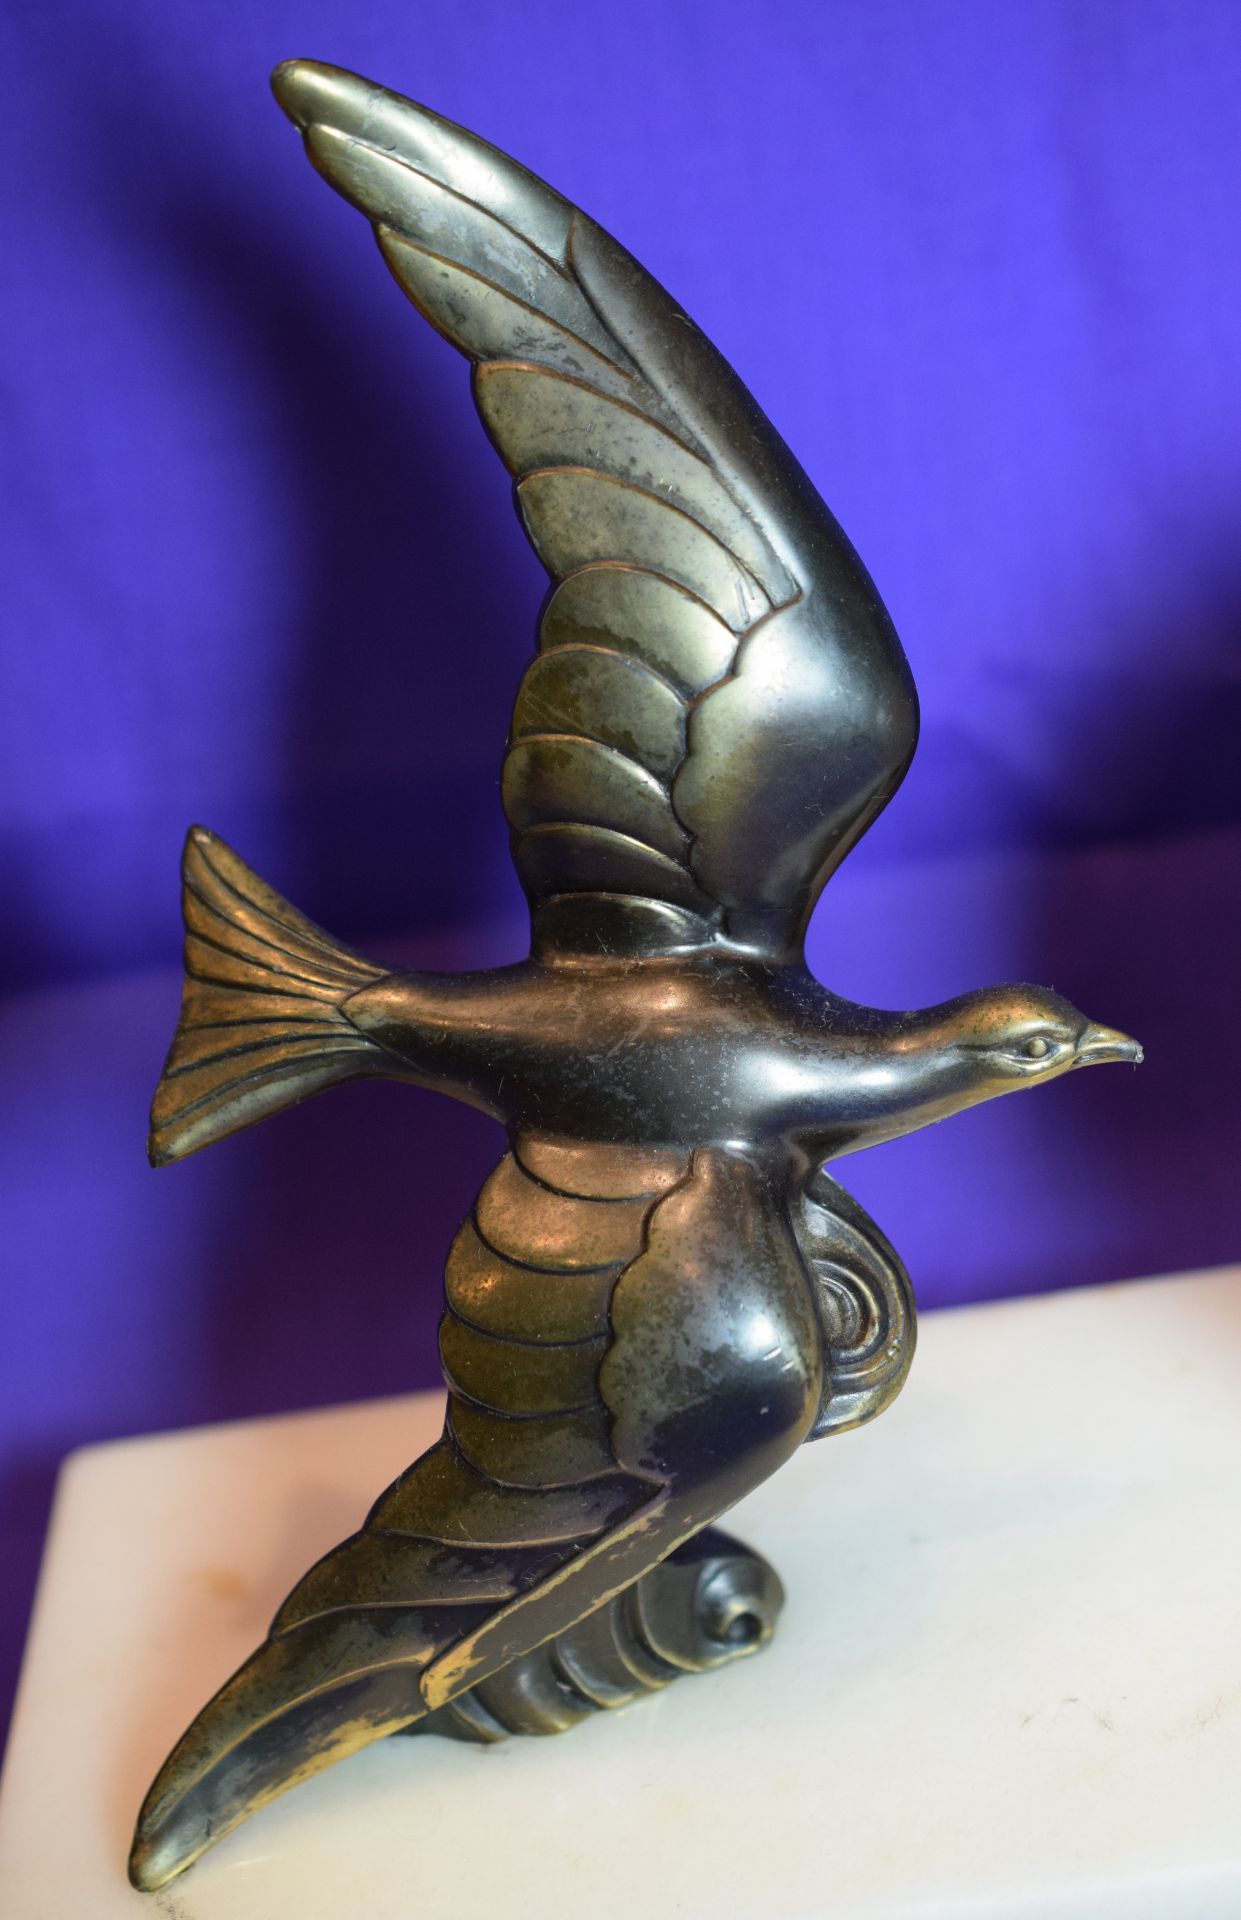 Art Deco Lamp With Flying Dove Sculpture And Marble Base - Image 2 of 5